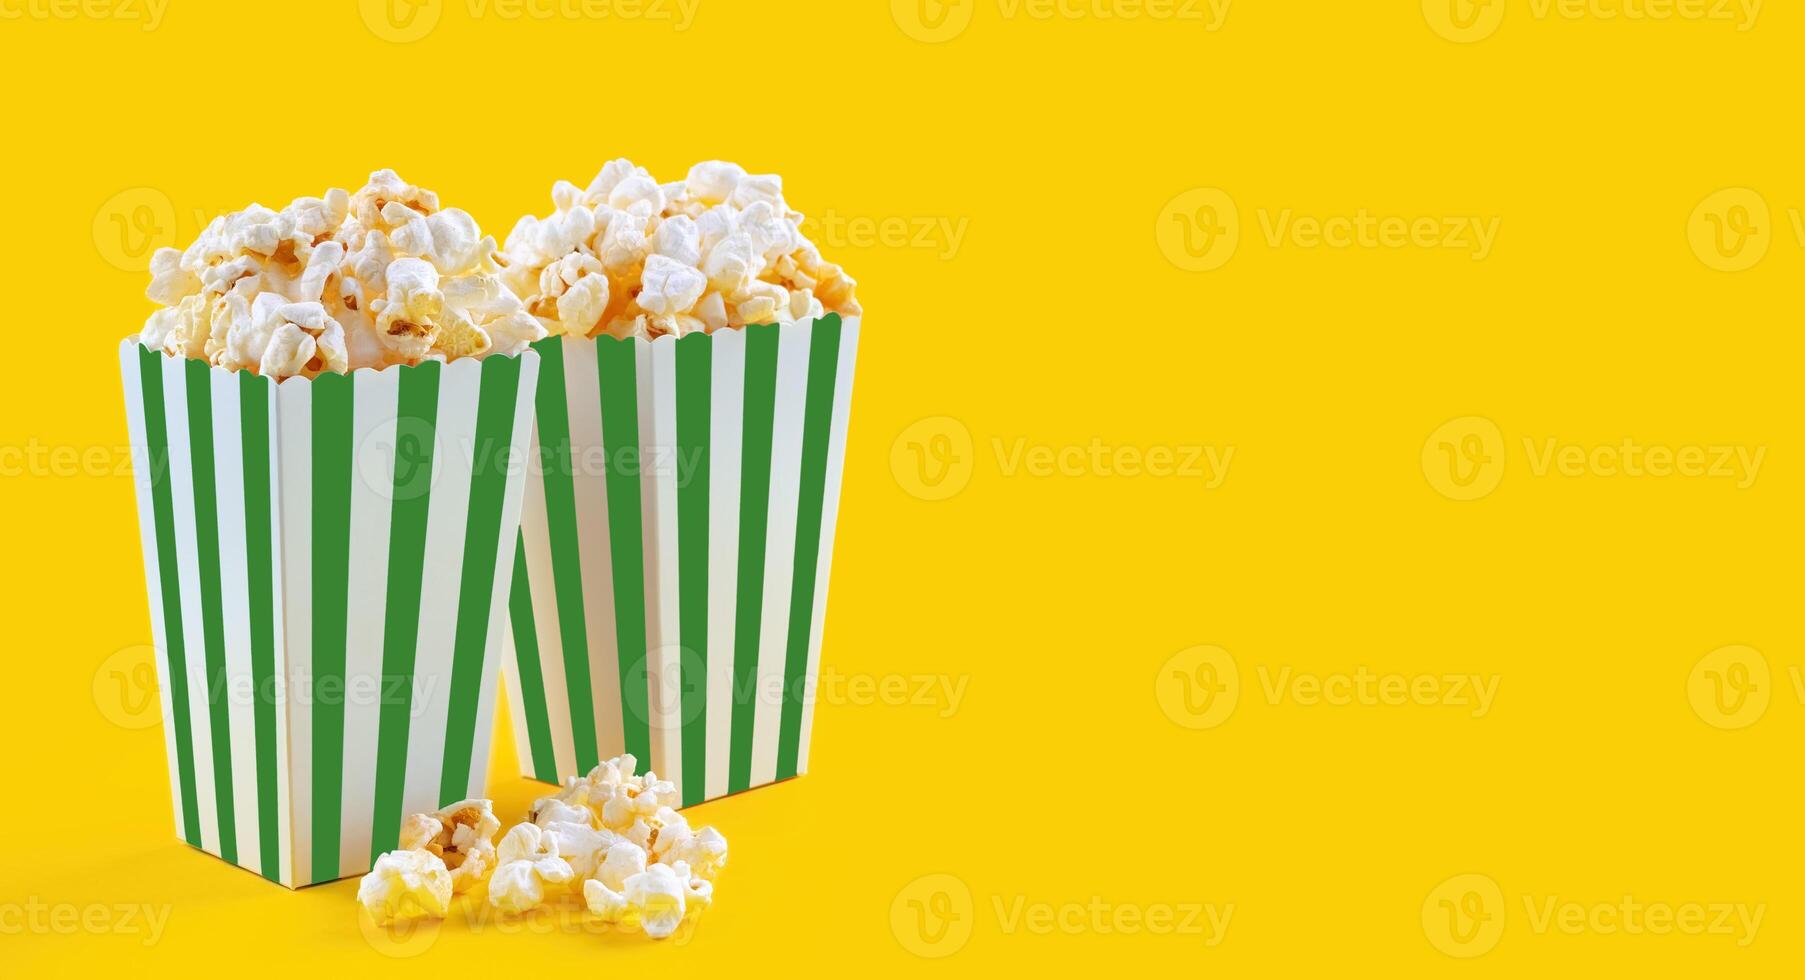 Green white striped carton bucket with tasty cheese popcorn, isolated on yellow background photo